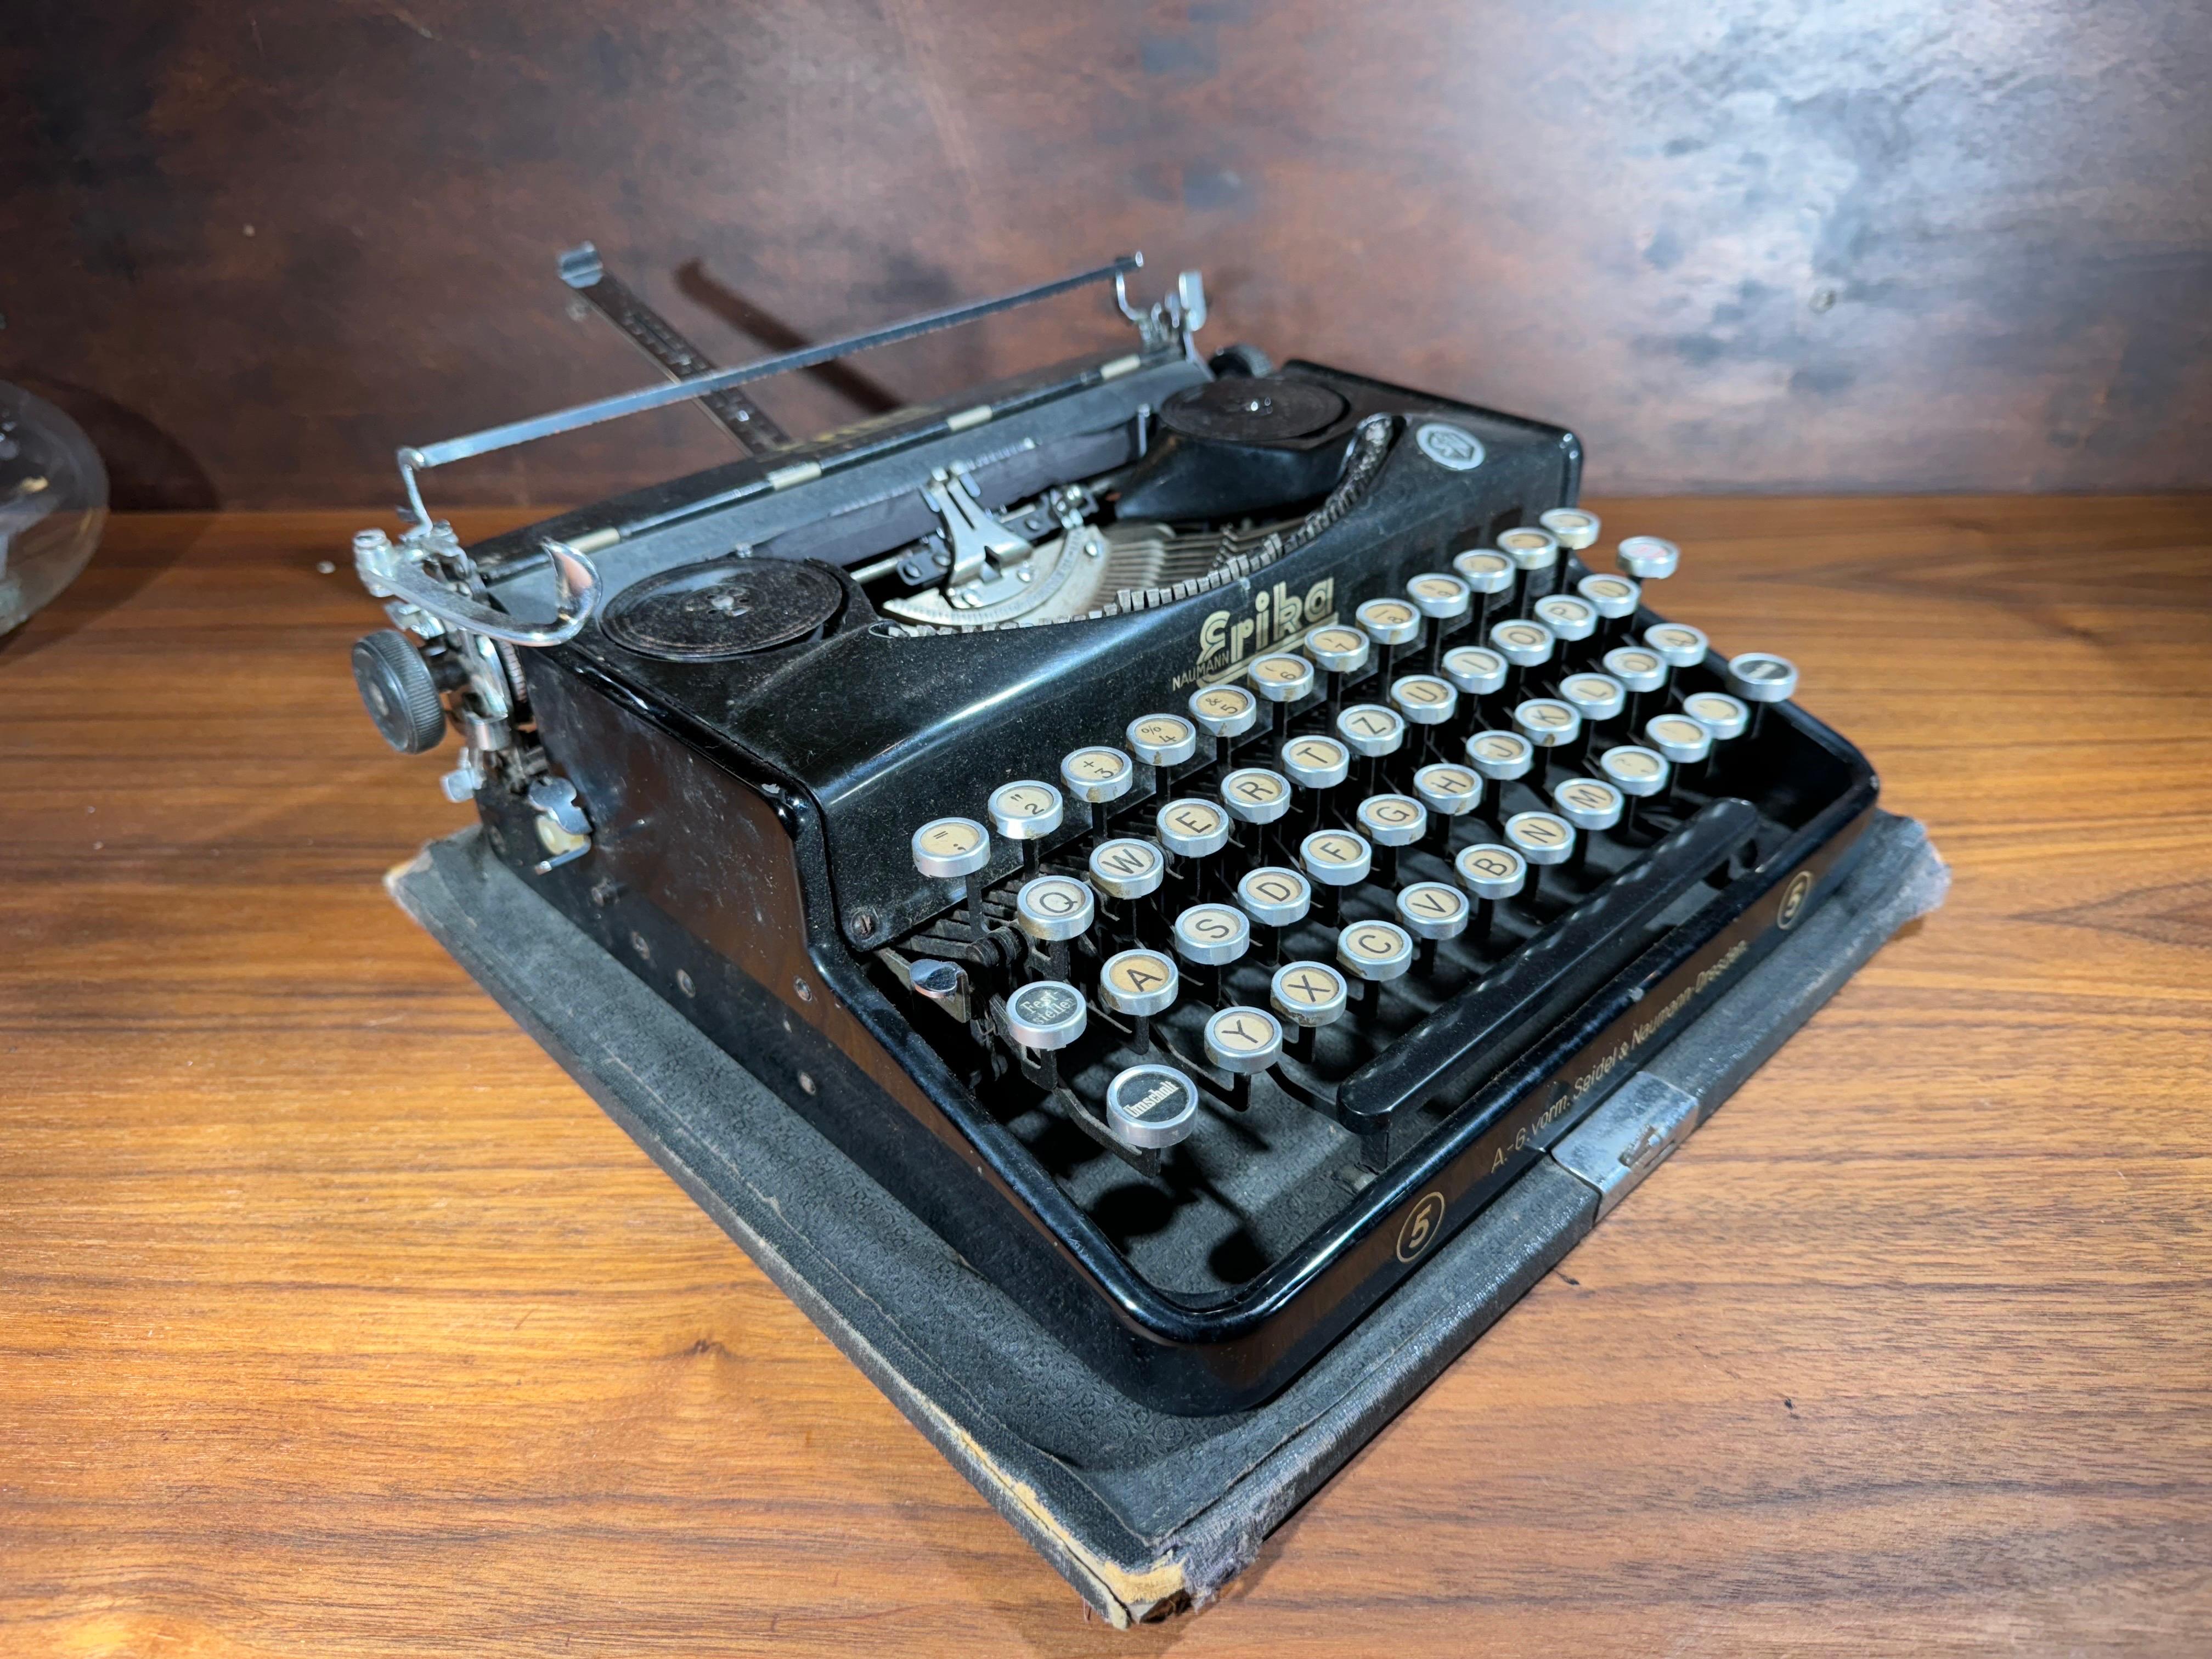 Gorgeous 1930's industrial portable typewriter made in Dresden, Germany by Seidel & Neumann. This Erika Model 5 typewriter is a stunner and comes complete with its original wood and leather carrying case. The letters on the keyboard indicate its an